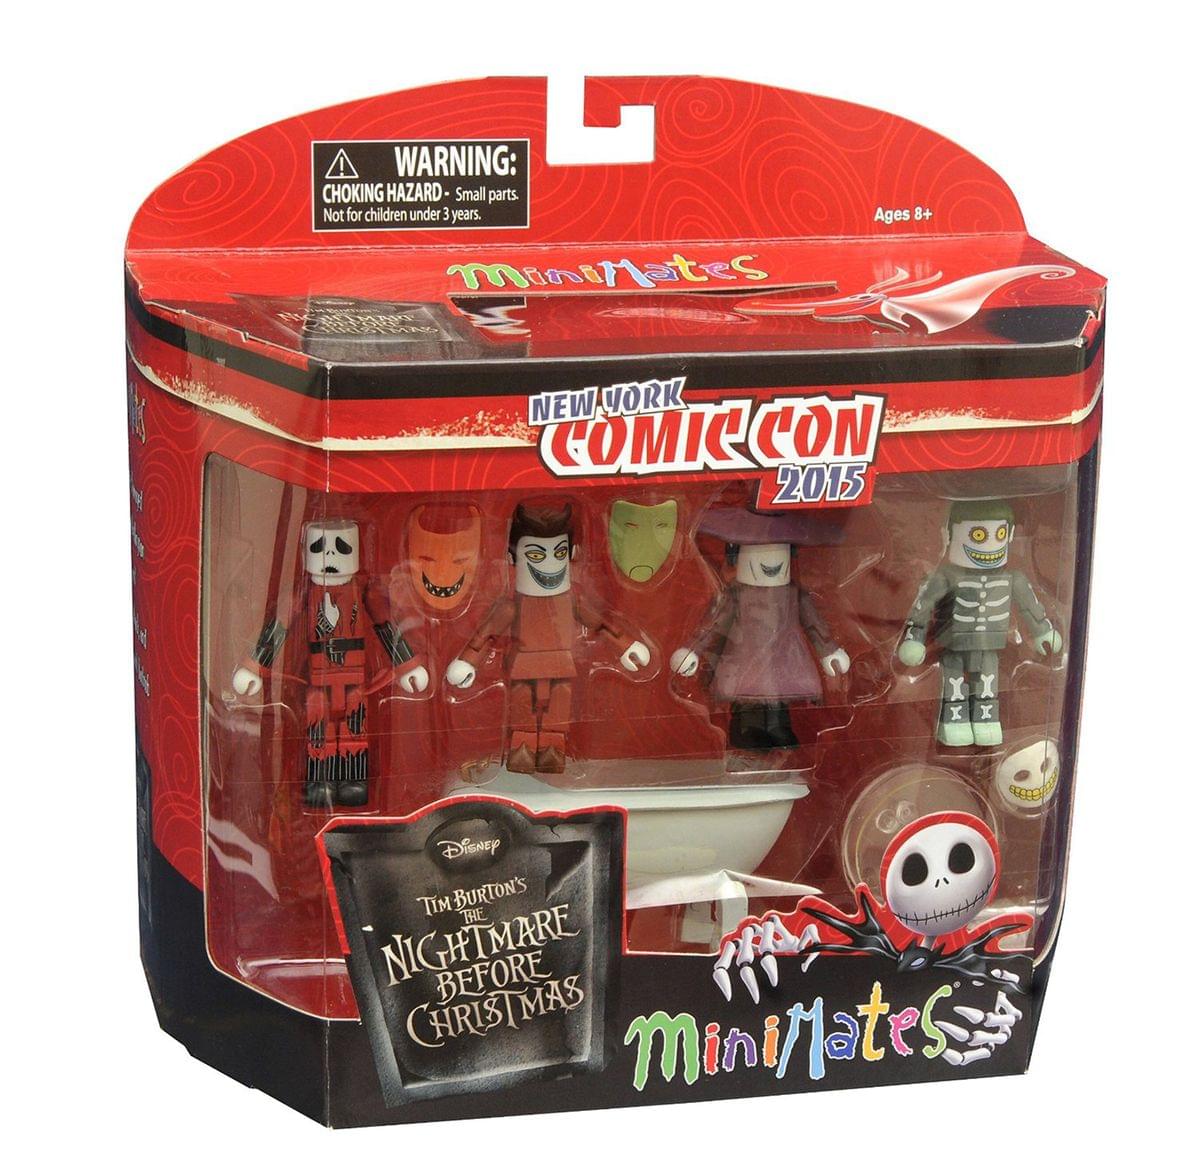 Minimate Nightmare Before Christmas NYCC 2015 Exclusive Action Figure Set